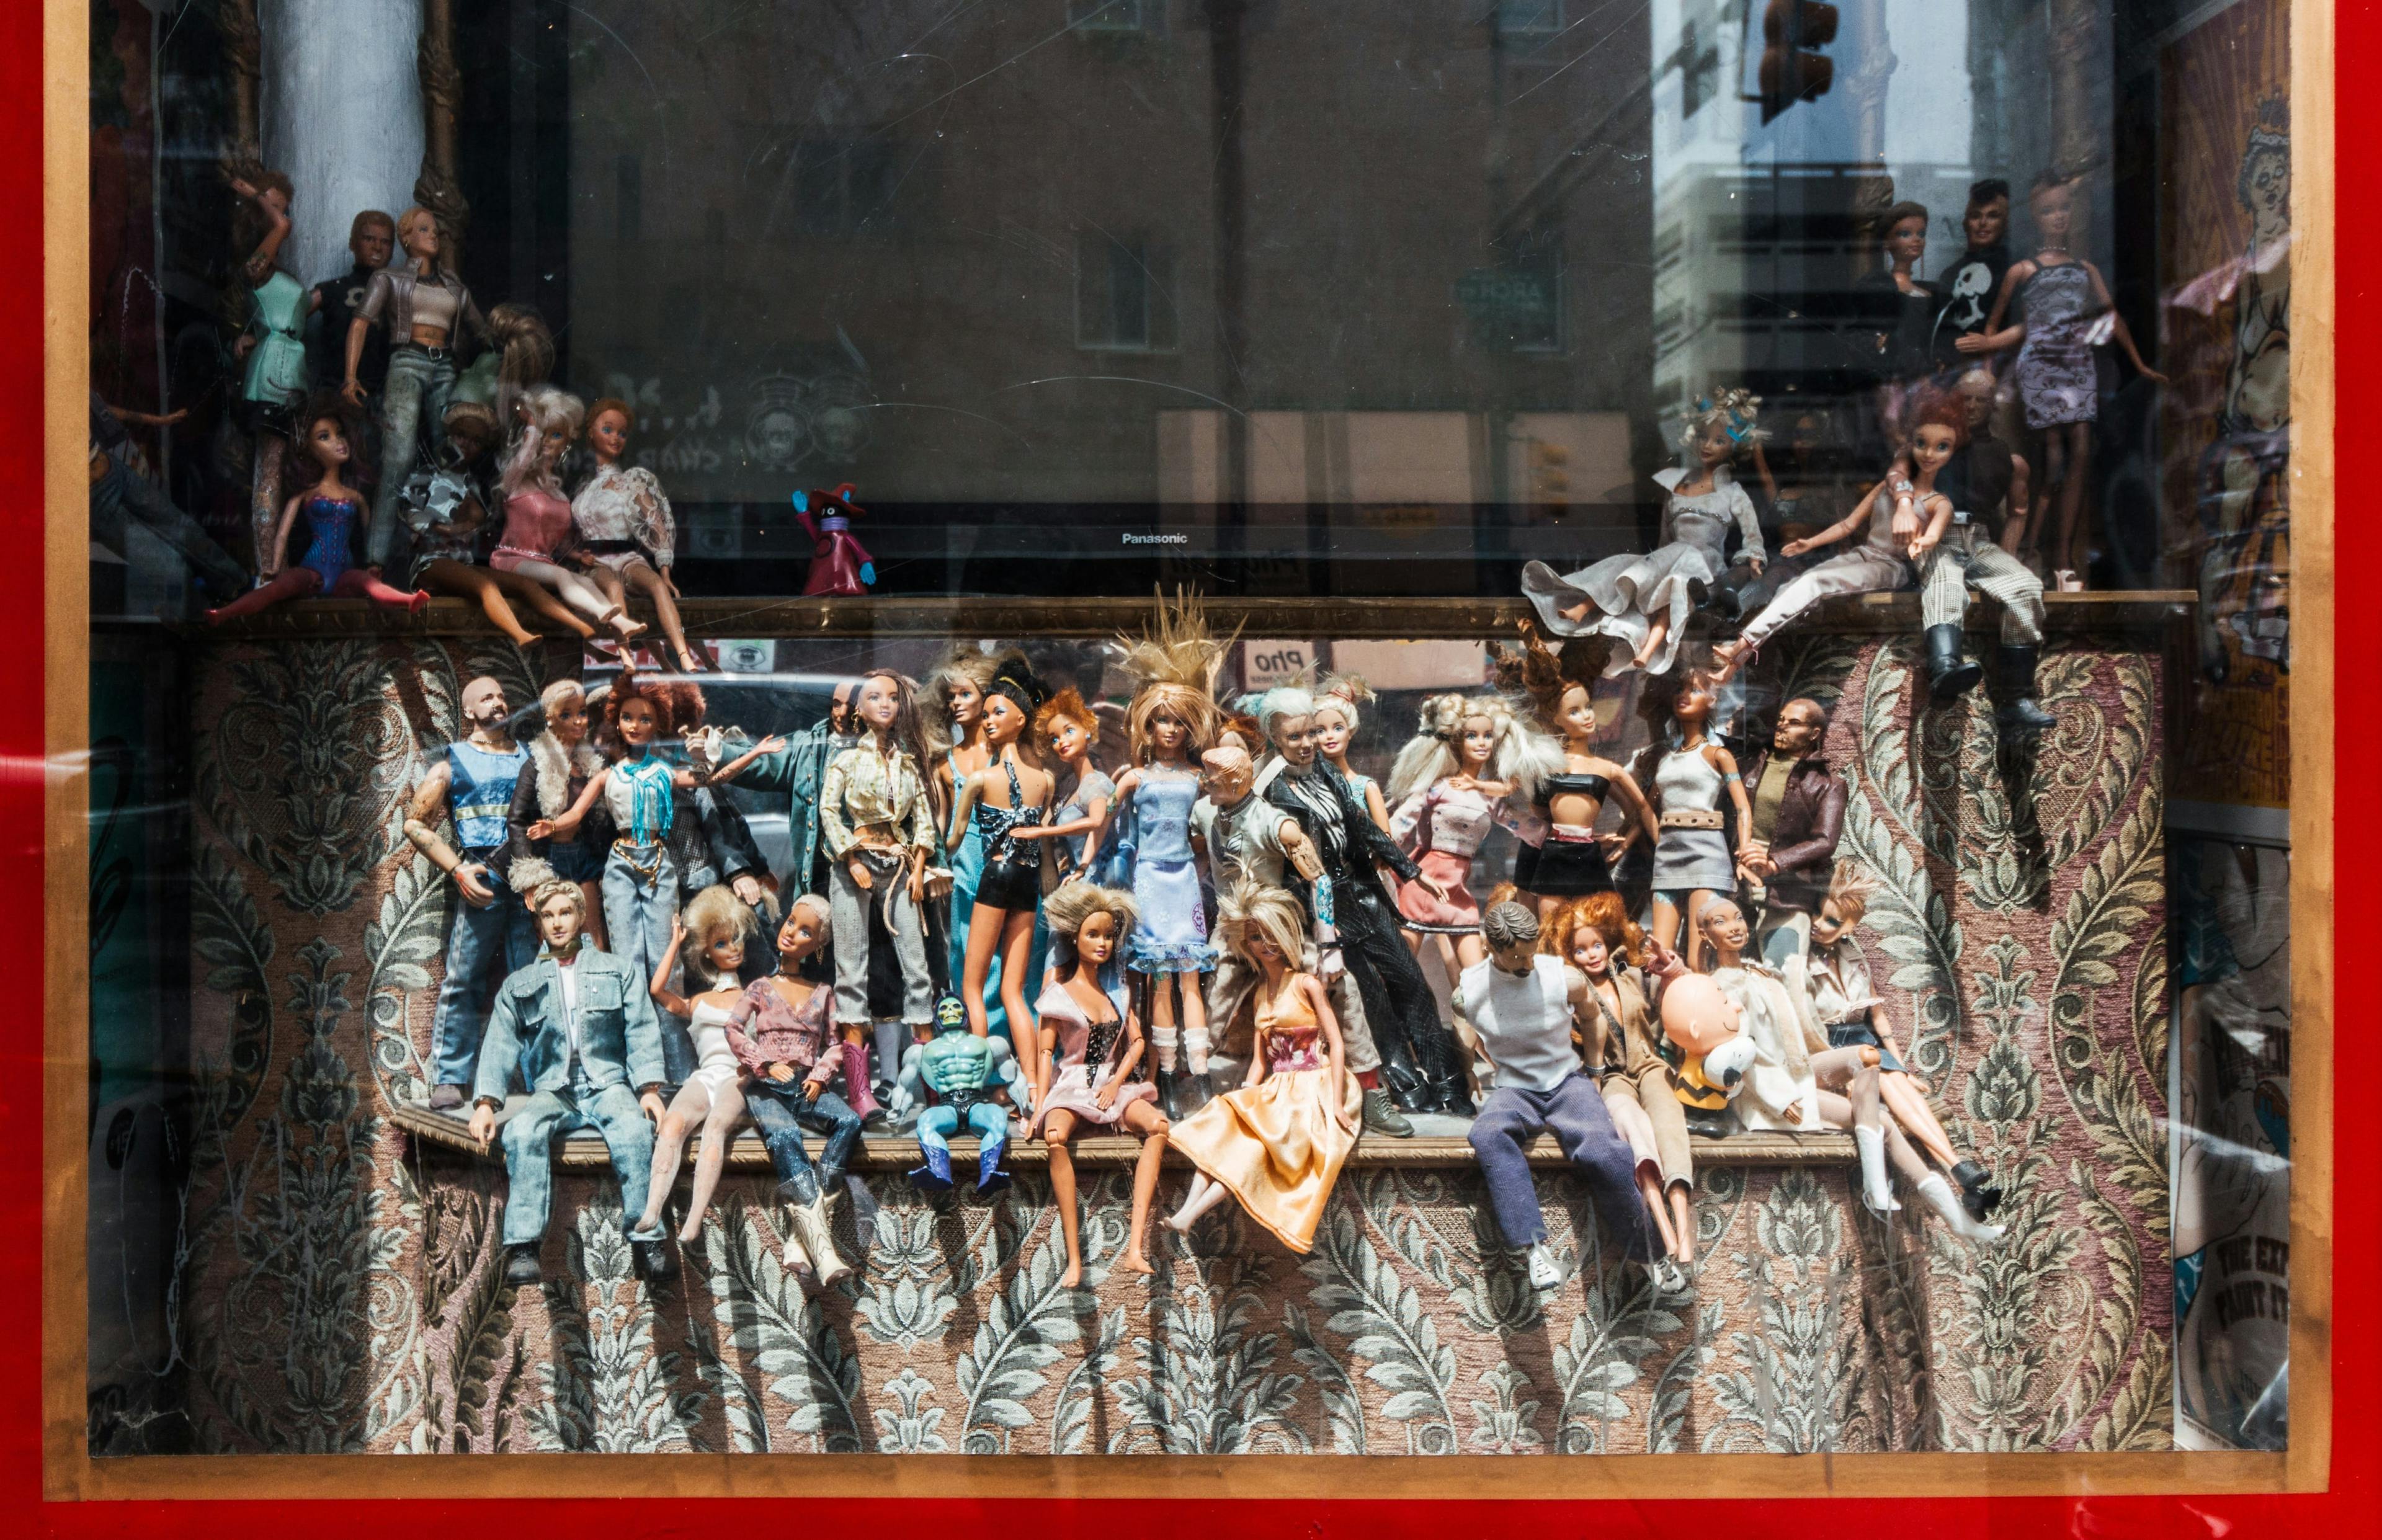 An assortment of Barbie dolls in a window display.